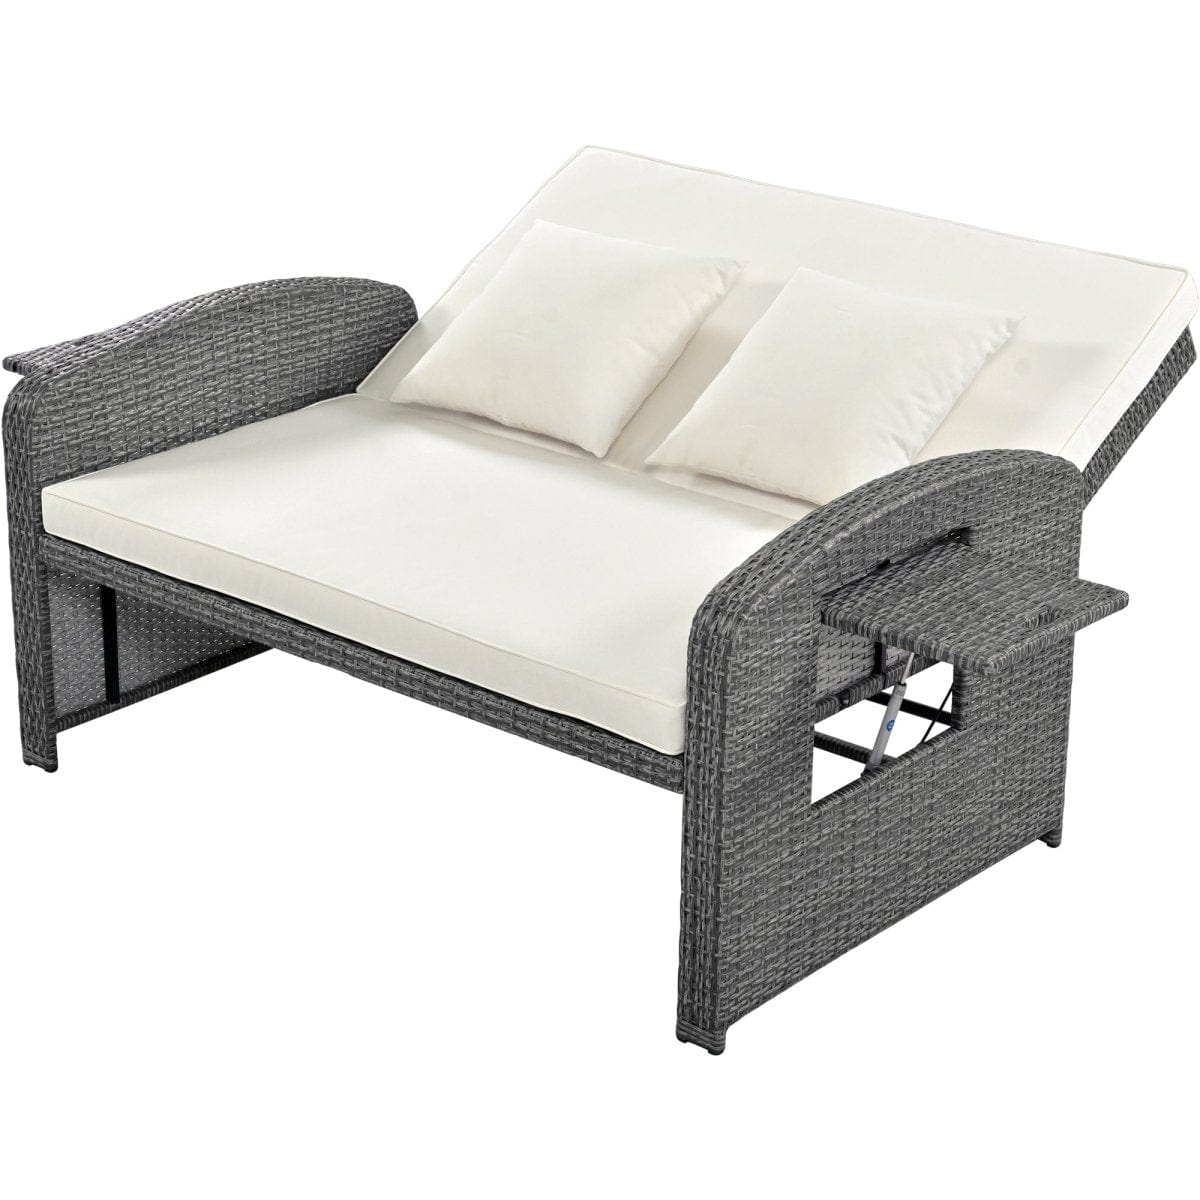 2 Person Outdoor Daybed with Built-in Tables16Topmaxx